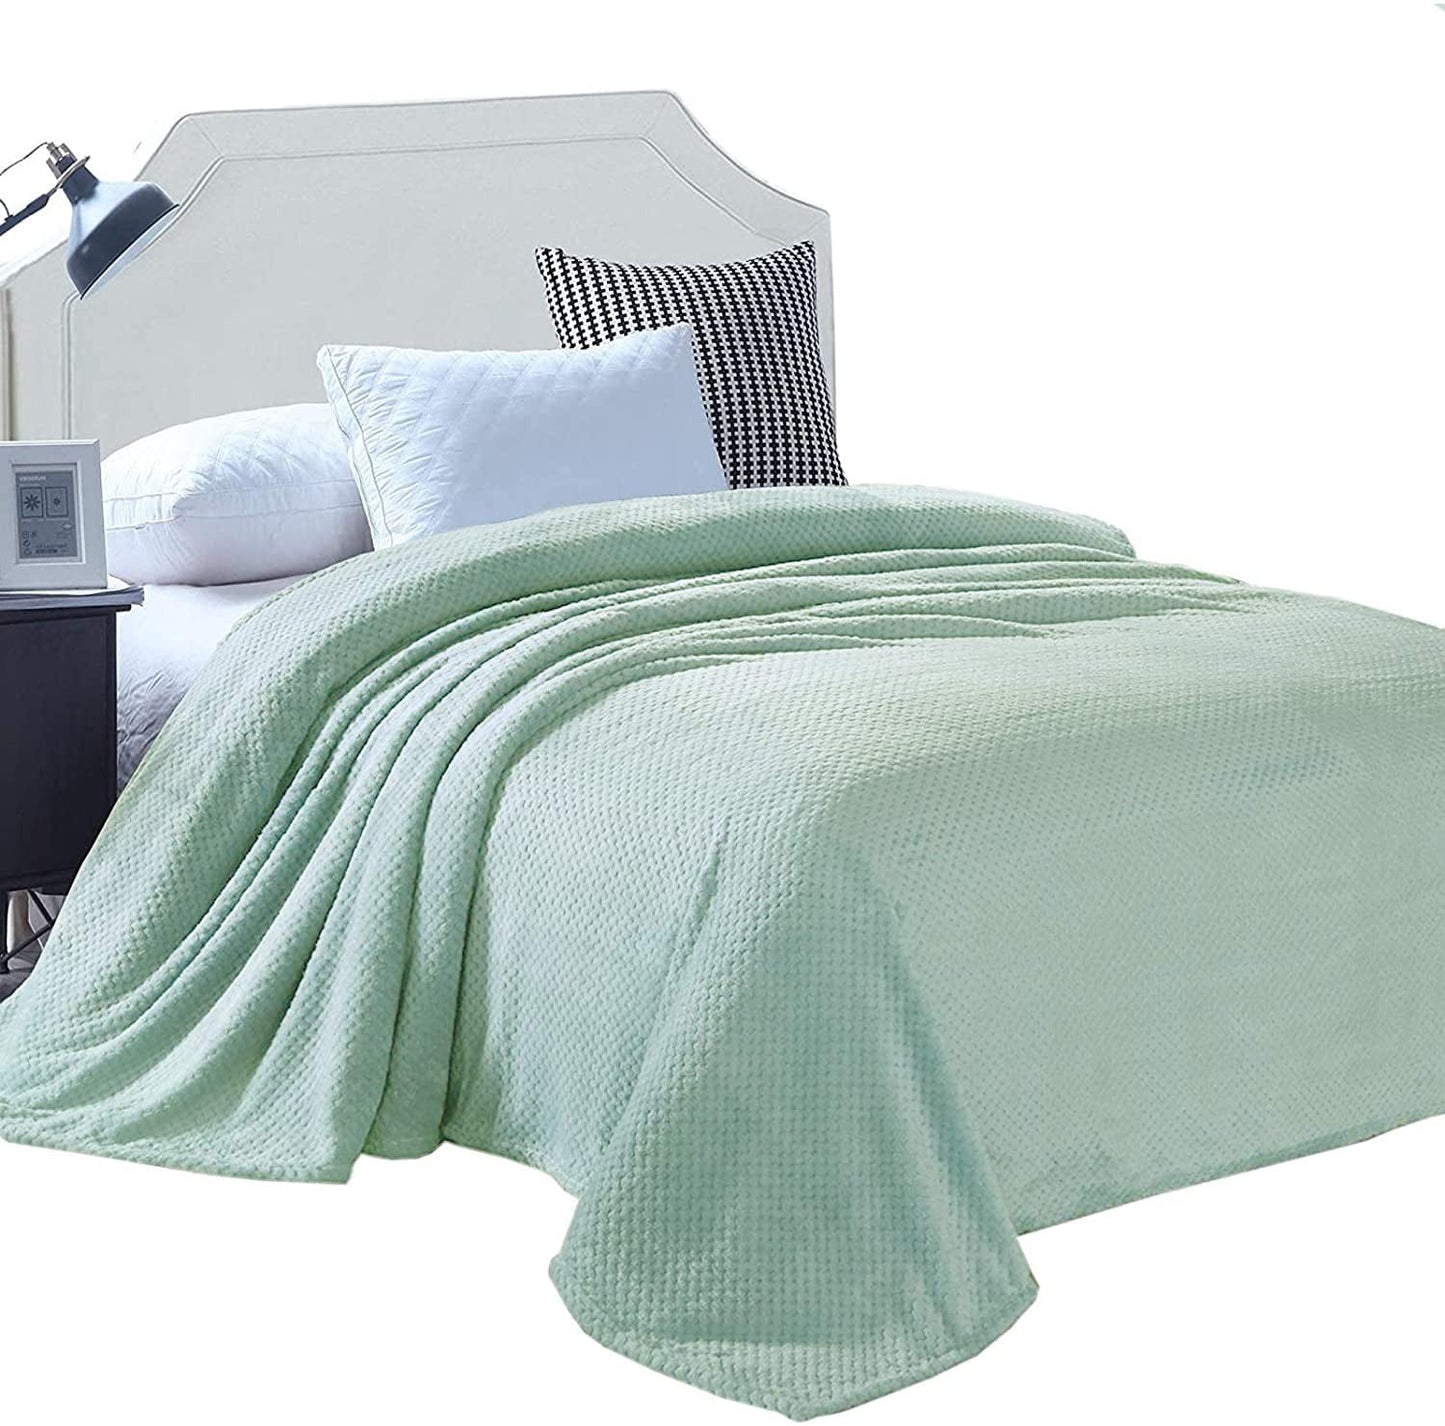 Exclusivo Mezcla Waffle Textured Soft Fleece Blanket, Twin Size Bed Blanket, Cozy Warm and Lightweight (Mint Green, 90x66 inches)